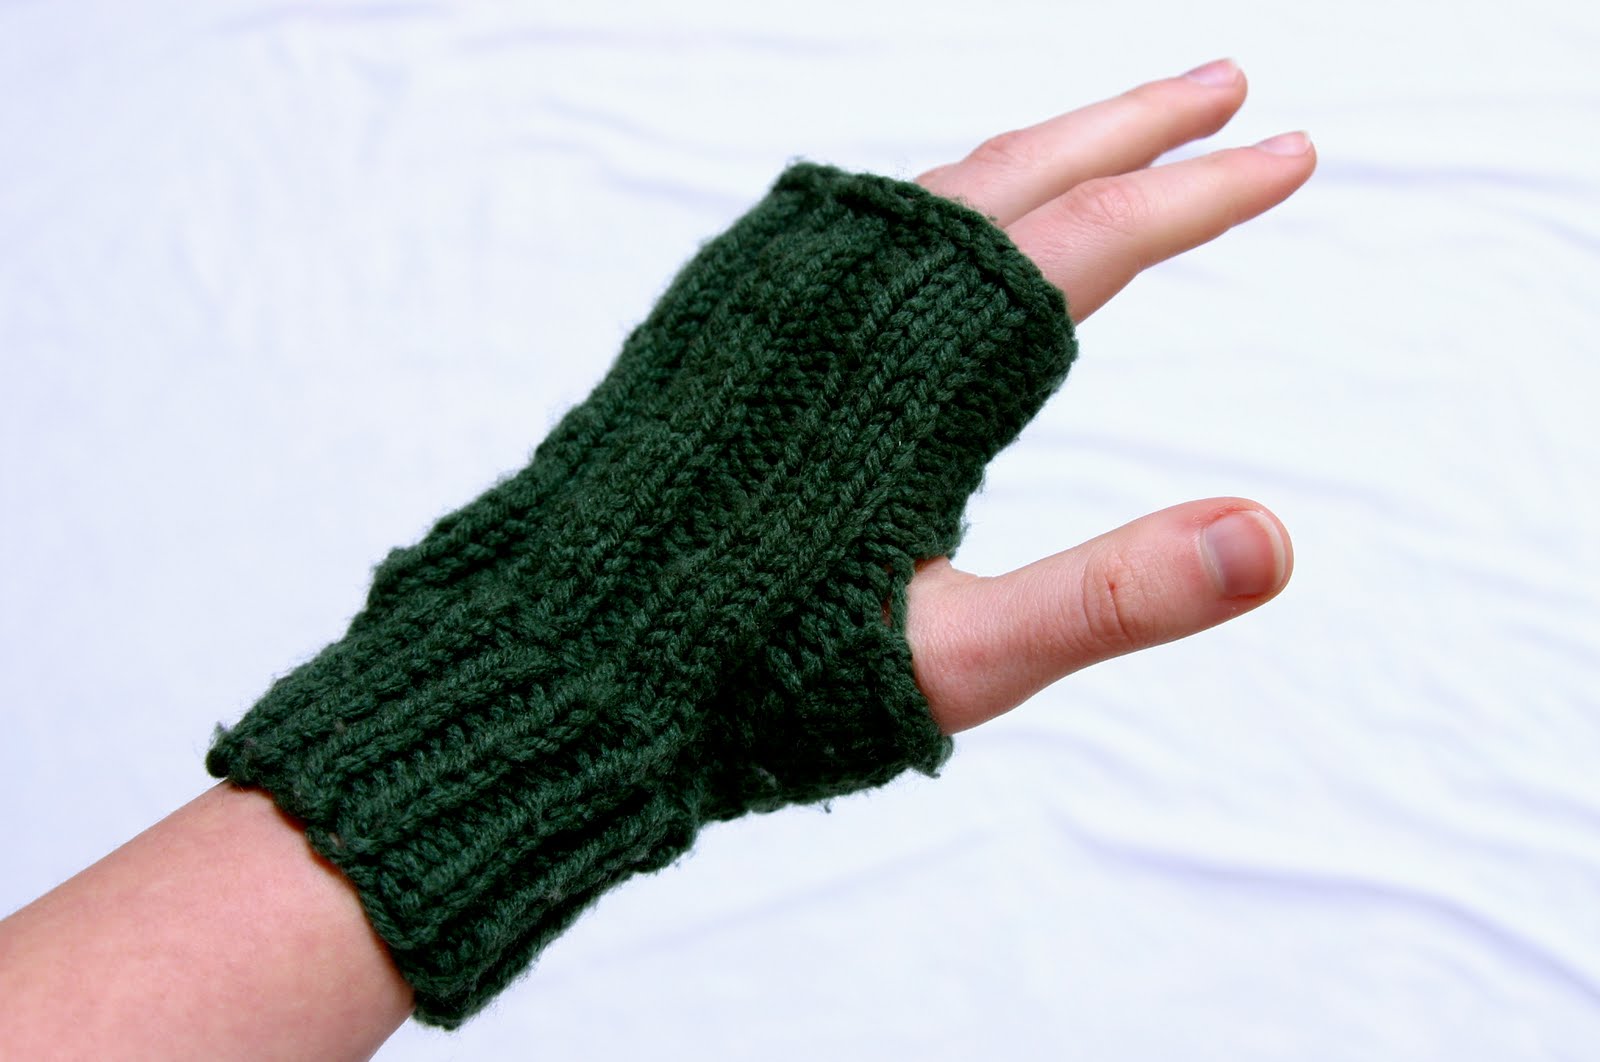 TwoNeedle Fingerless Gloves Free Knitting Pattern The Fuzzy Square